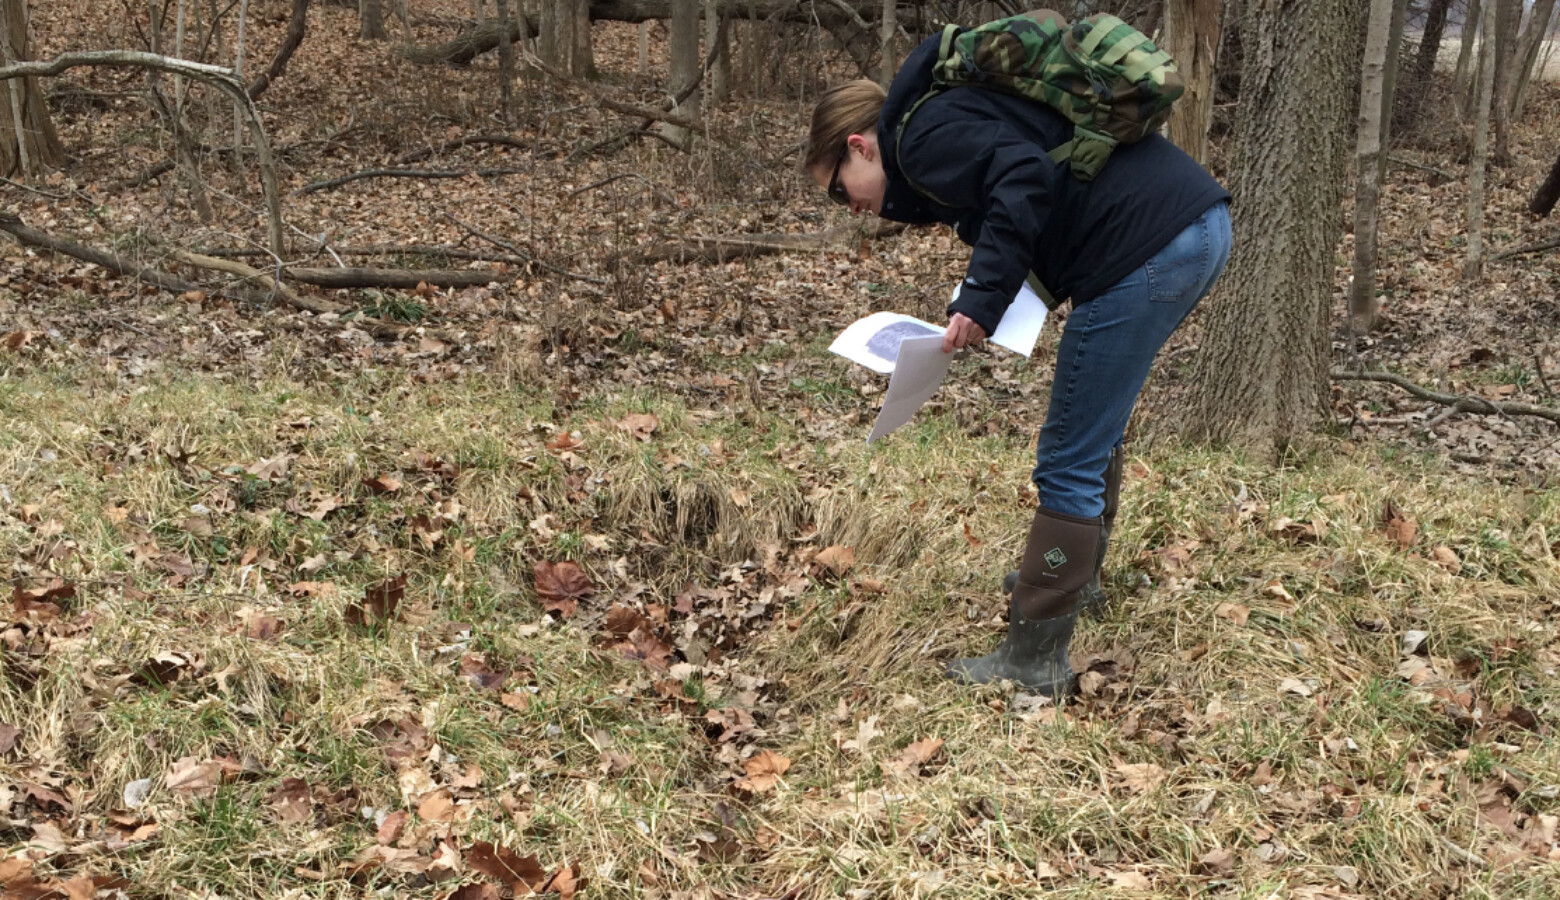 An Indiana Department of Environmental Management employee inspects an area in Hamilton County where an agricultural tile has been damaged, causing what they call an isolated wetland to form over time, 2017. (Courtesy of IDEM)